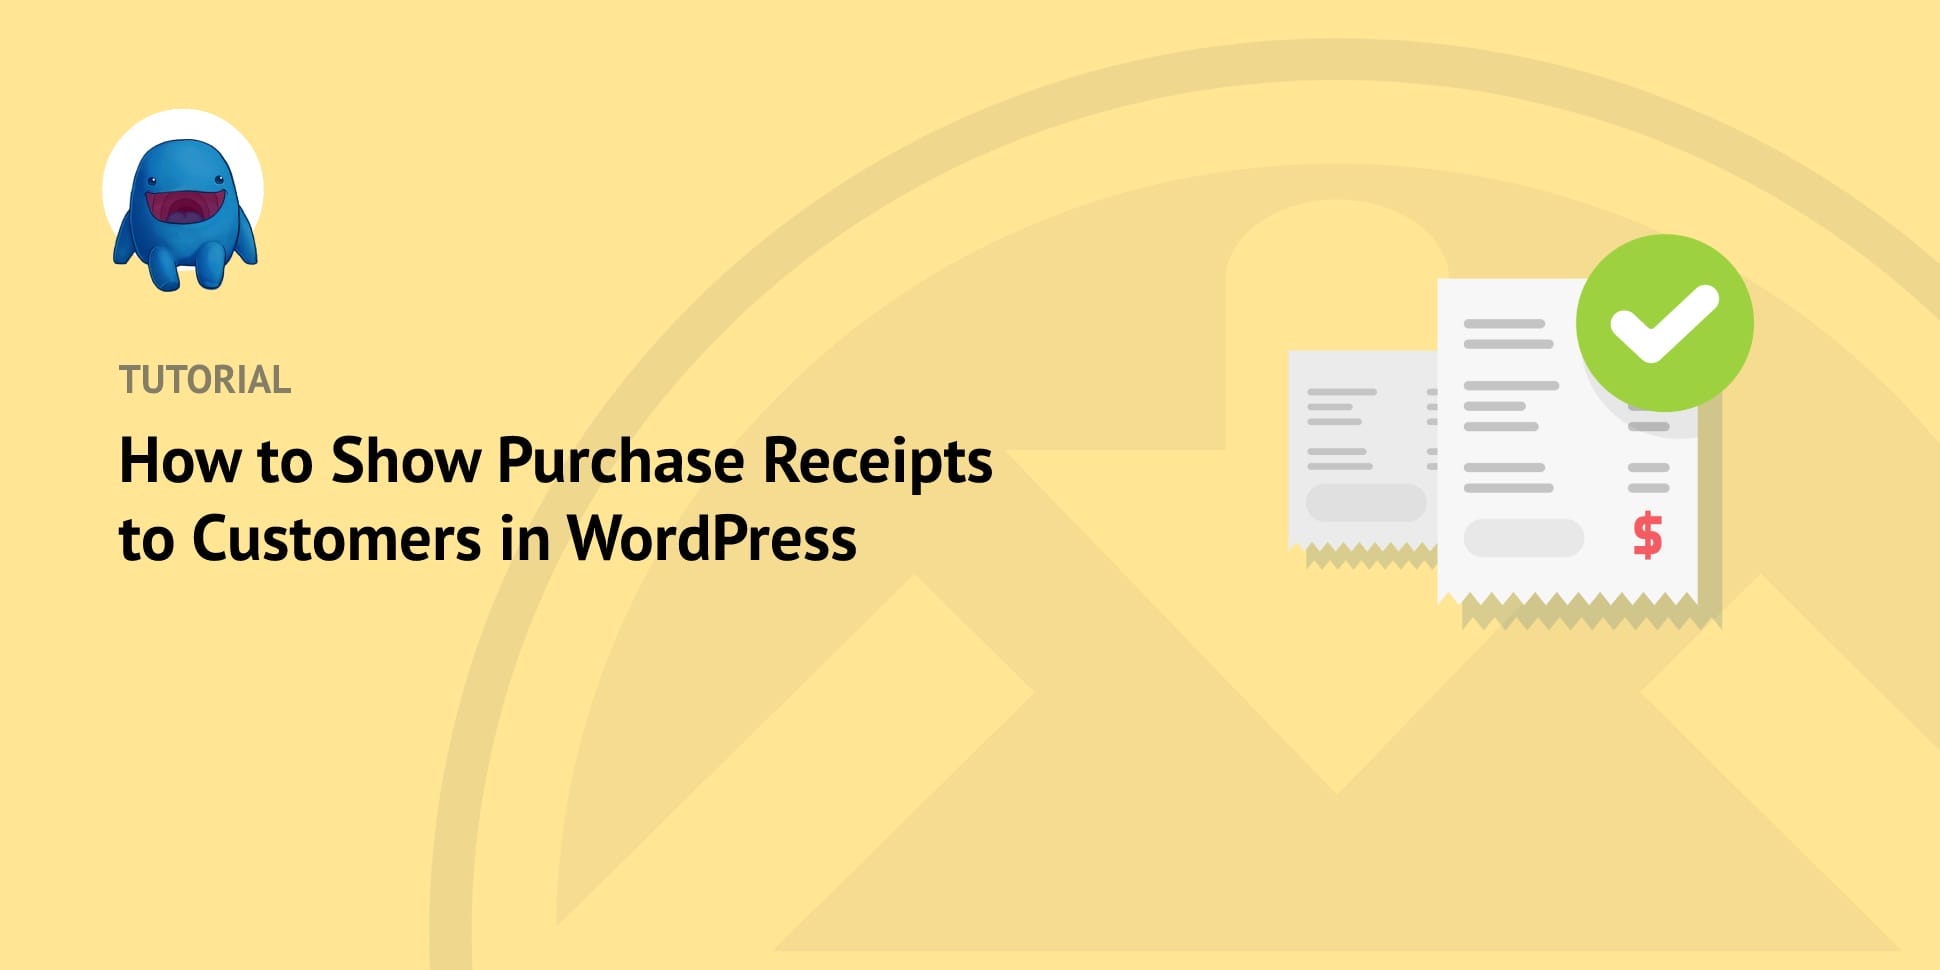 How to Show Purchase Receipts to Customers in WordPress